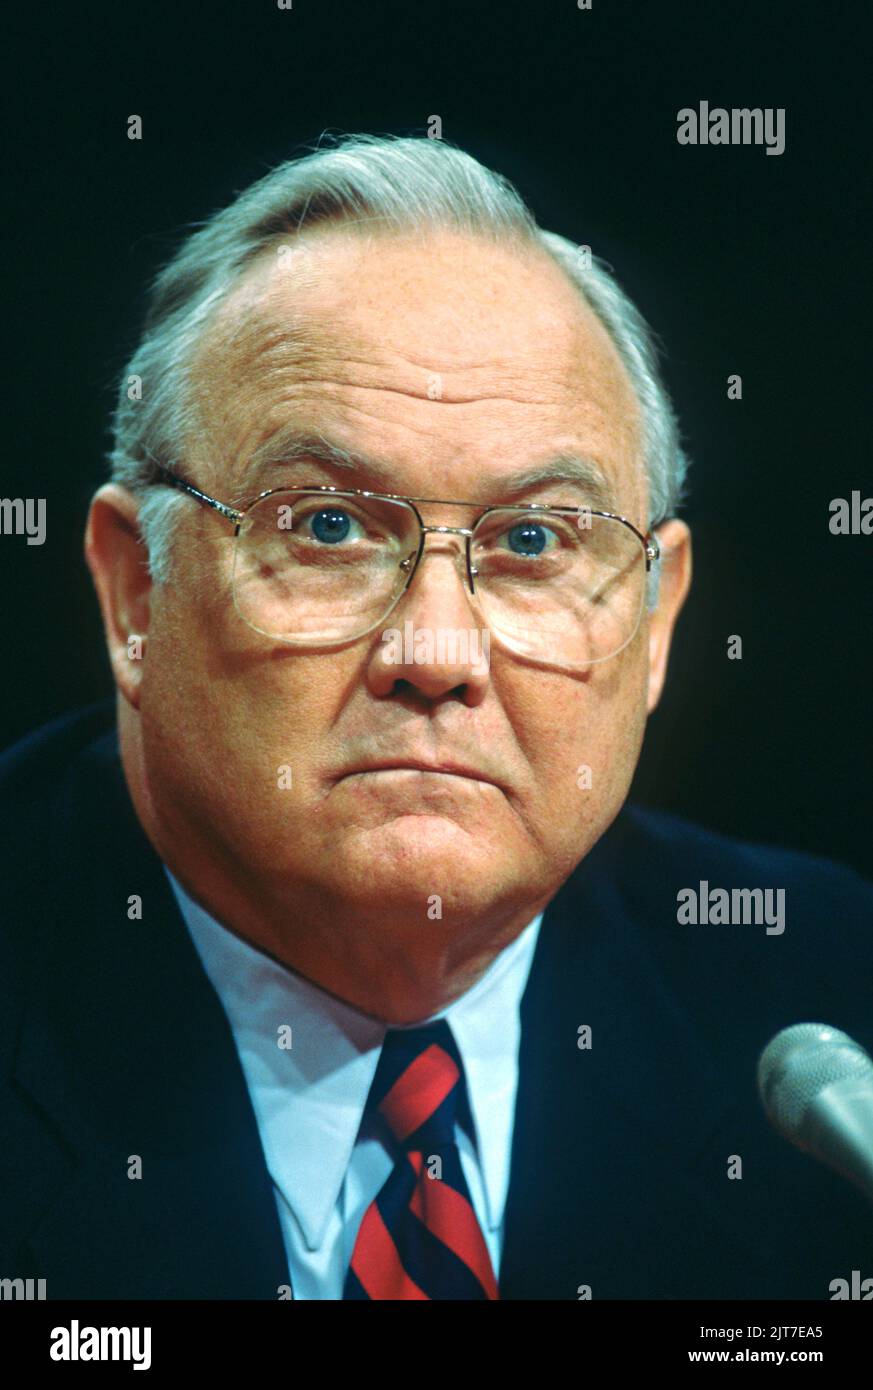 U.S. Army Ret. Gen. Norman Schwarzkopf, testifies on Gulf War illness before the Senate Armed Services Committee on Capitol Hill, February 27, 1997 in Washington, D.C. Stock Photo